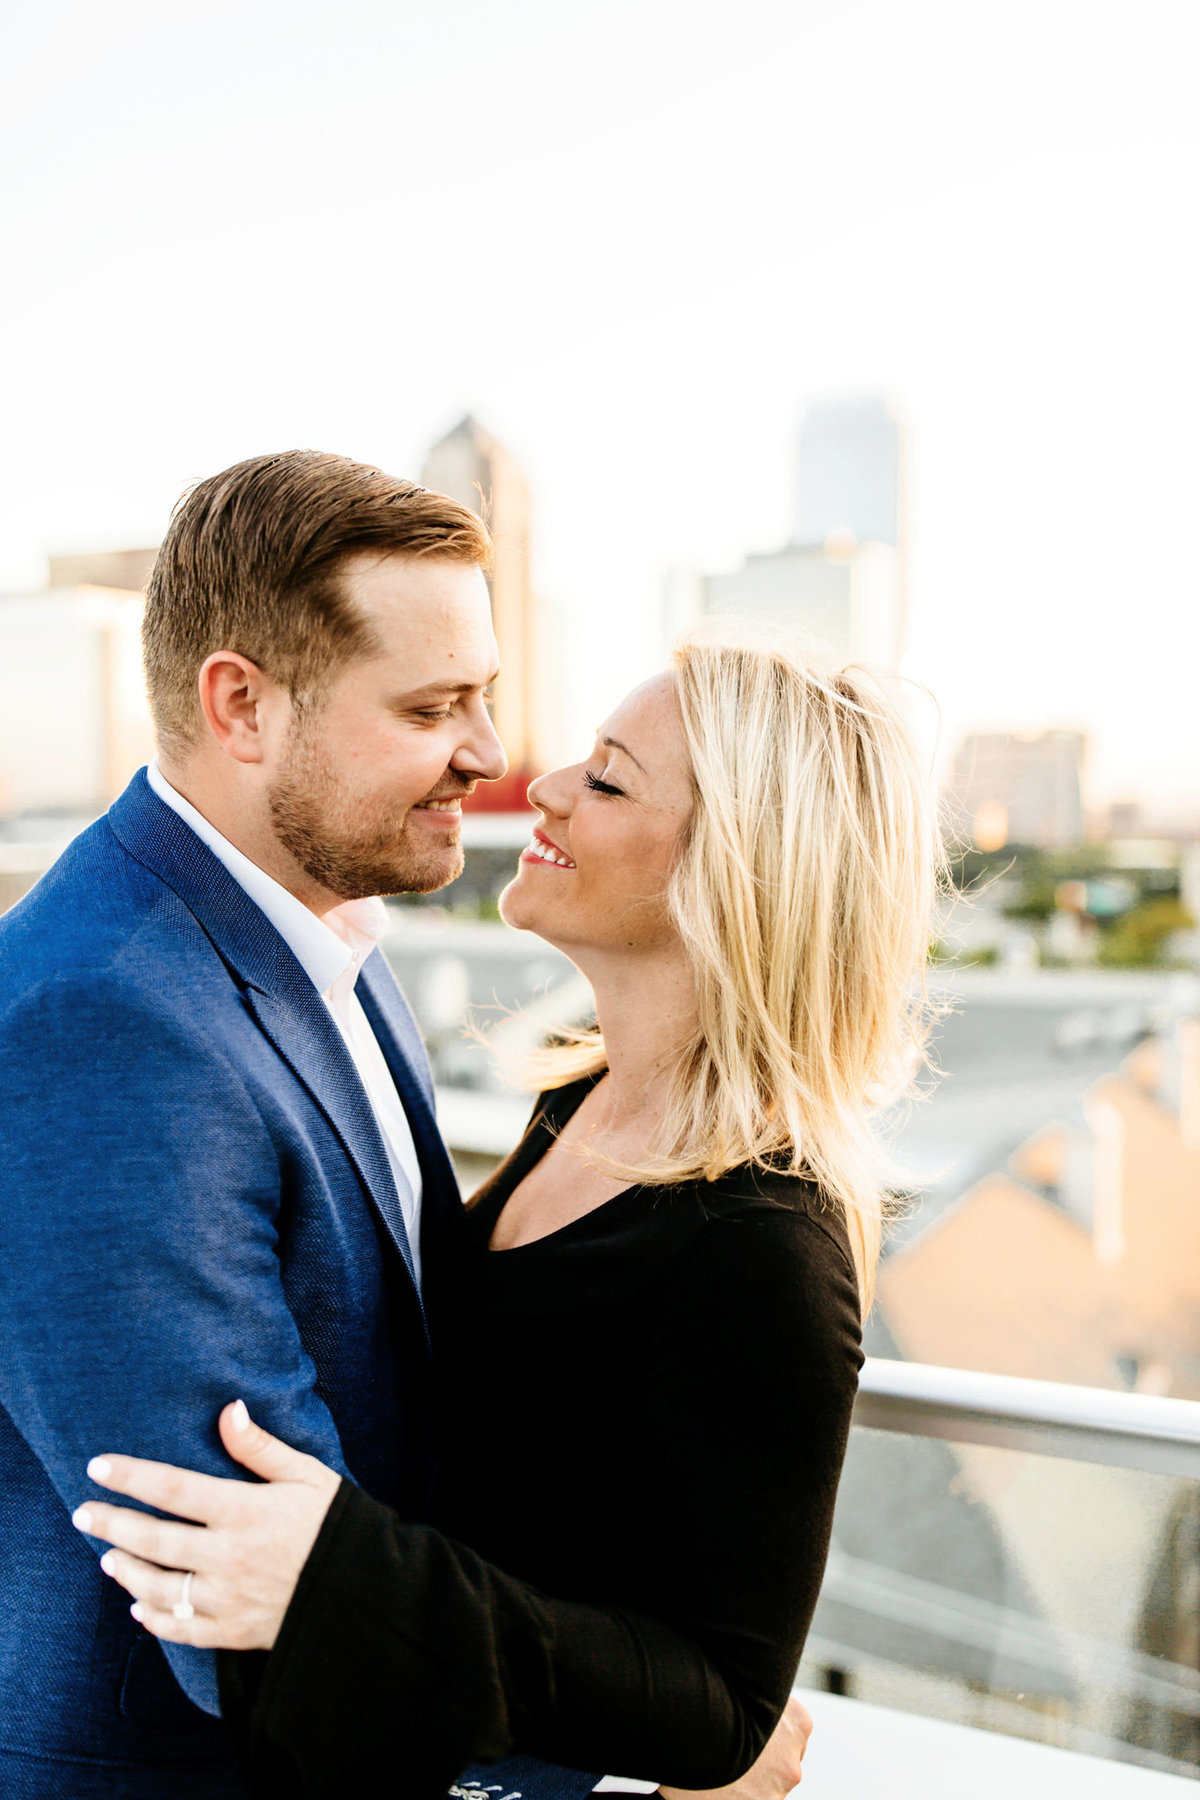 Eric & Megan - Downtown Dallas Rooftop Proposal & Engagement Session-99